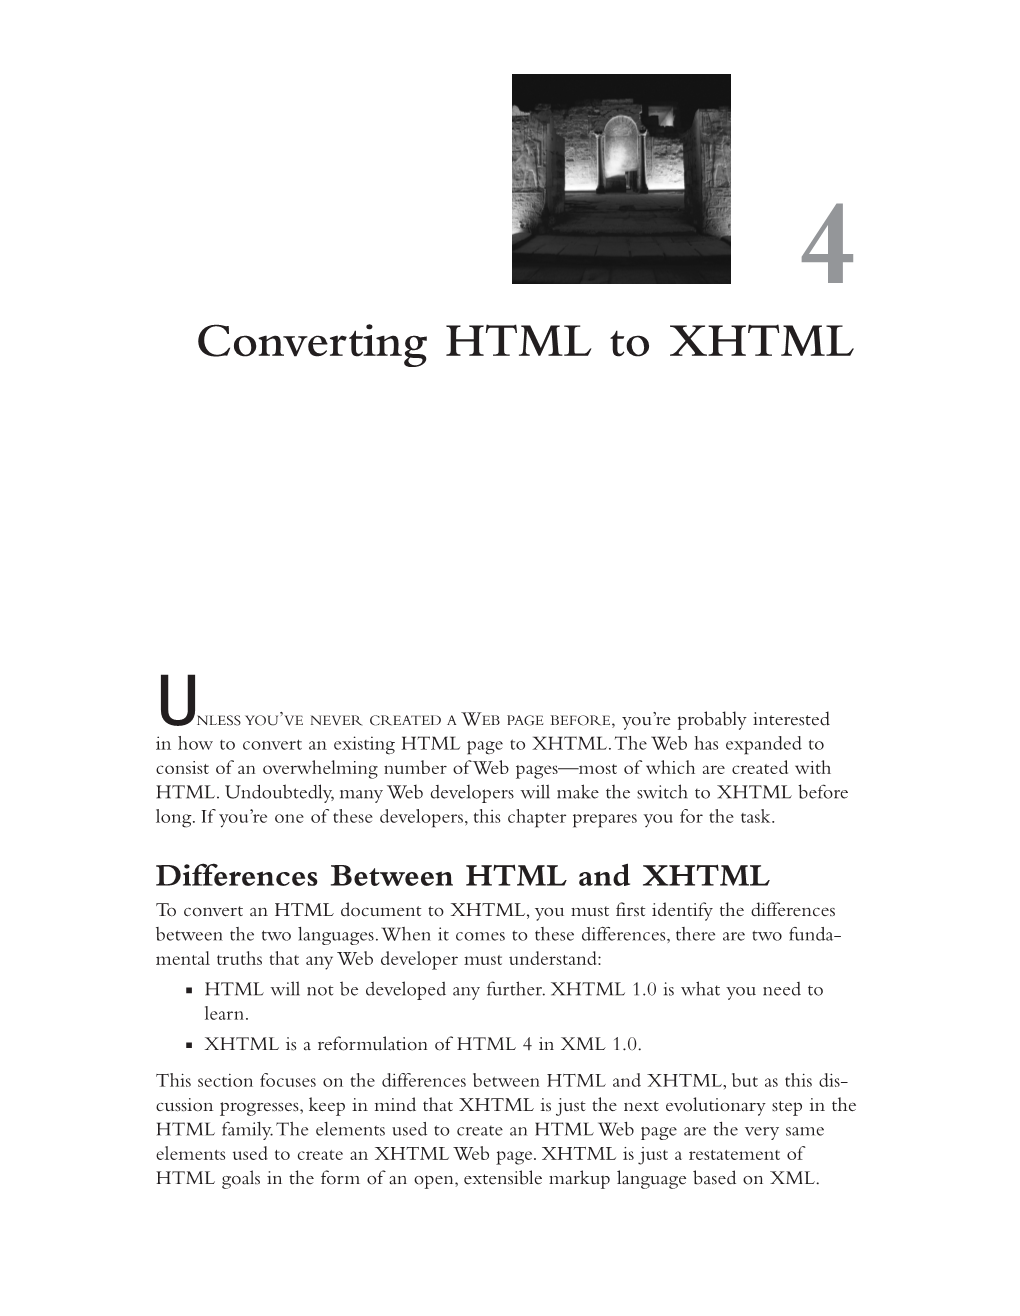 Converting HTML to XHTML